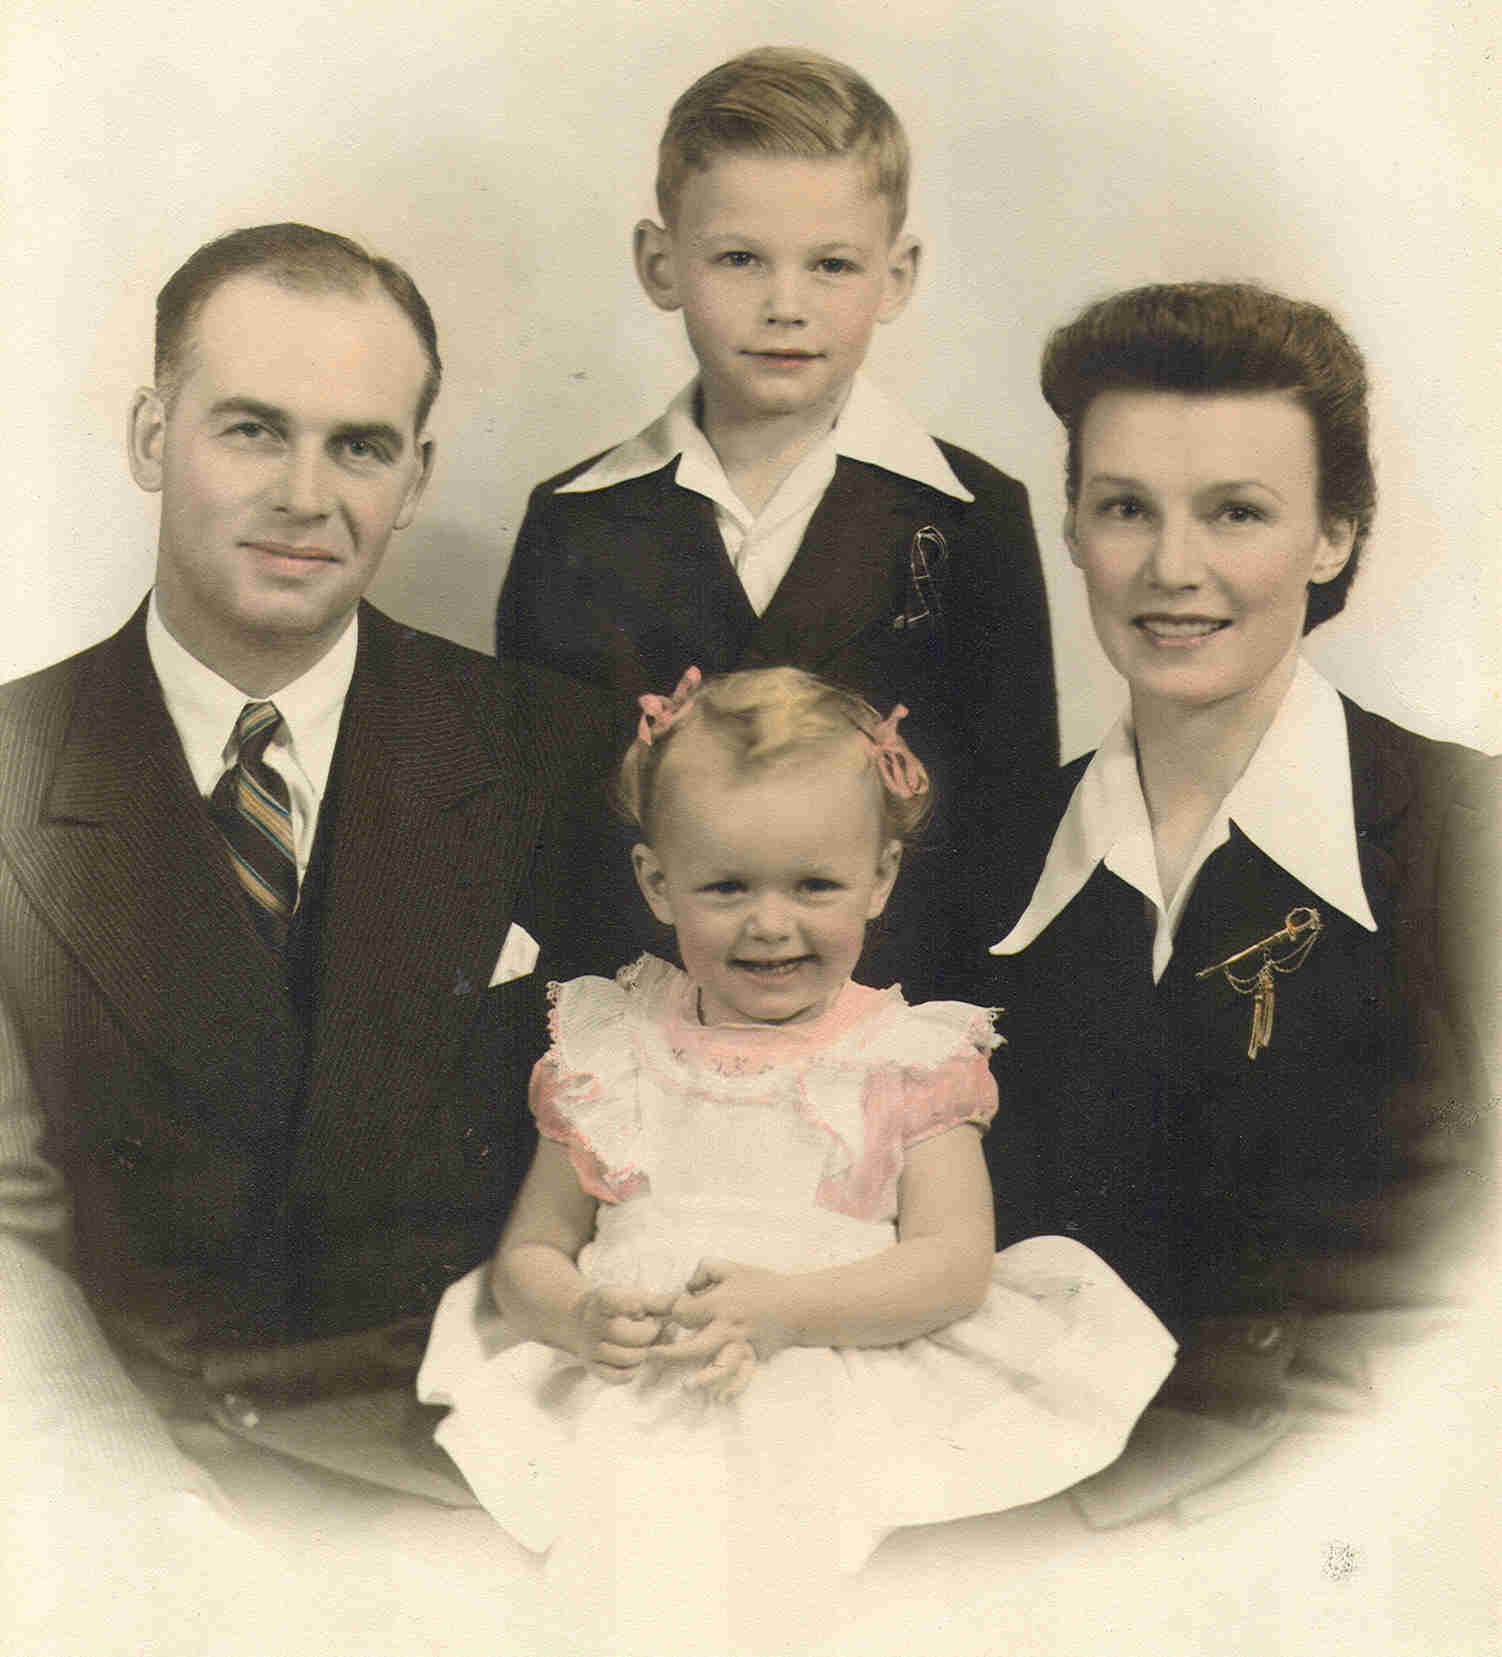 Judith Babbit and her parents Don and Helen Knecht and brother Richard in 1941